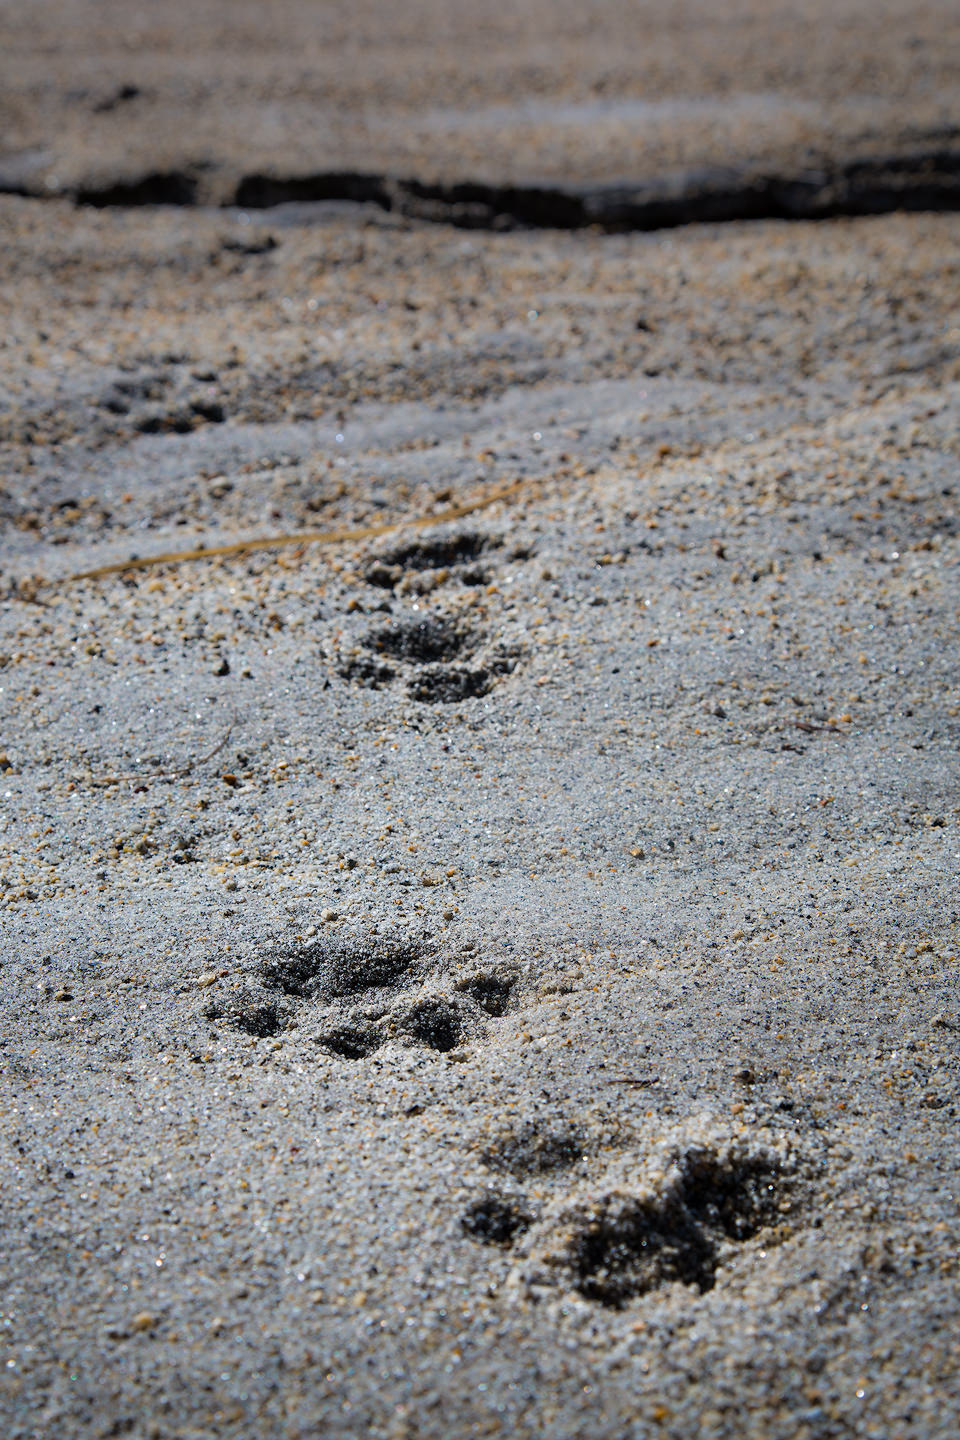 Snow leopard tracks in soft sand.